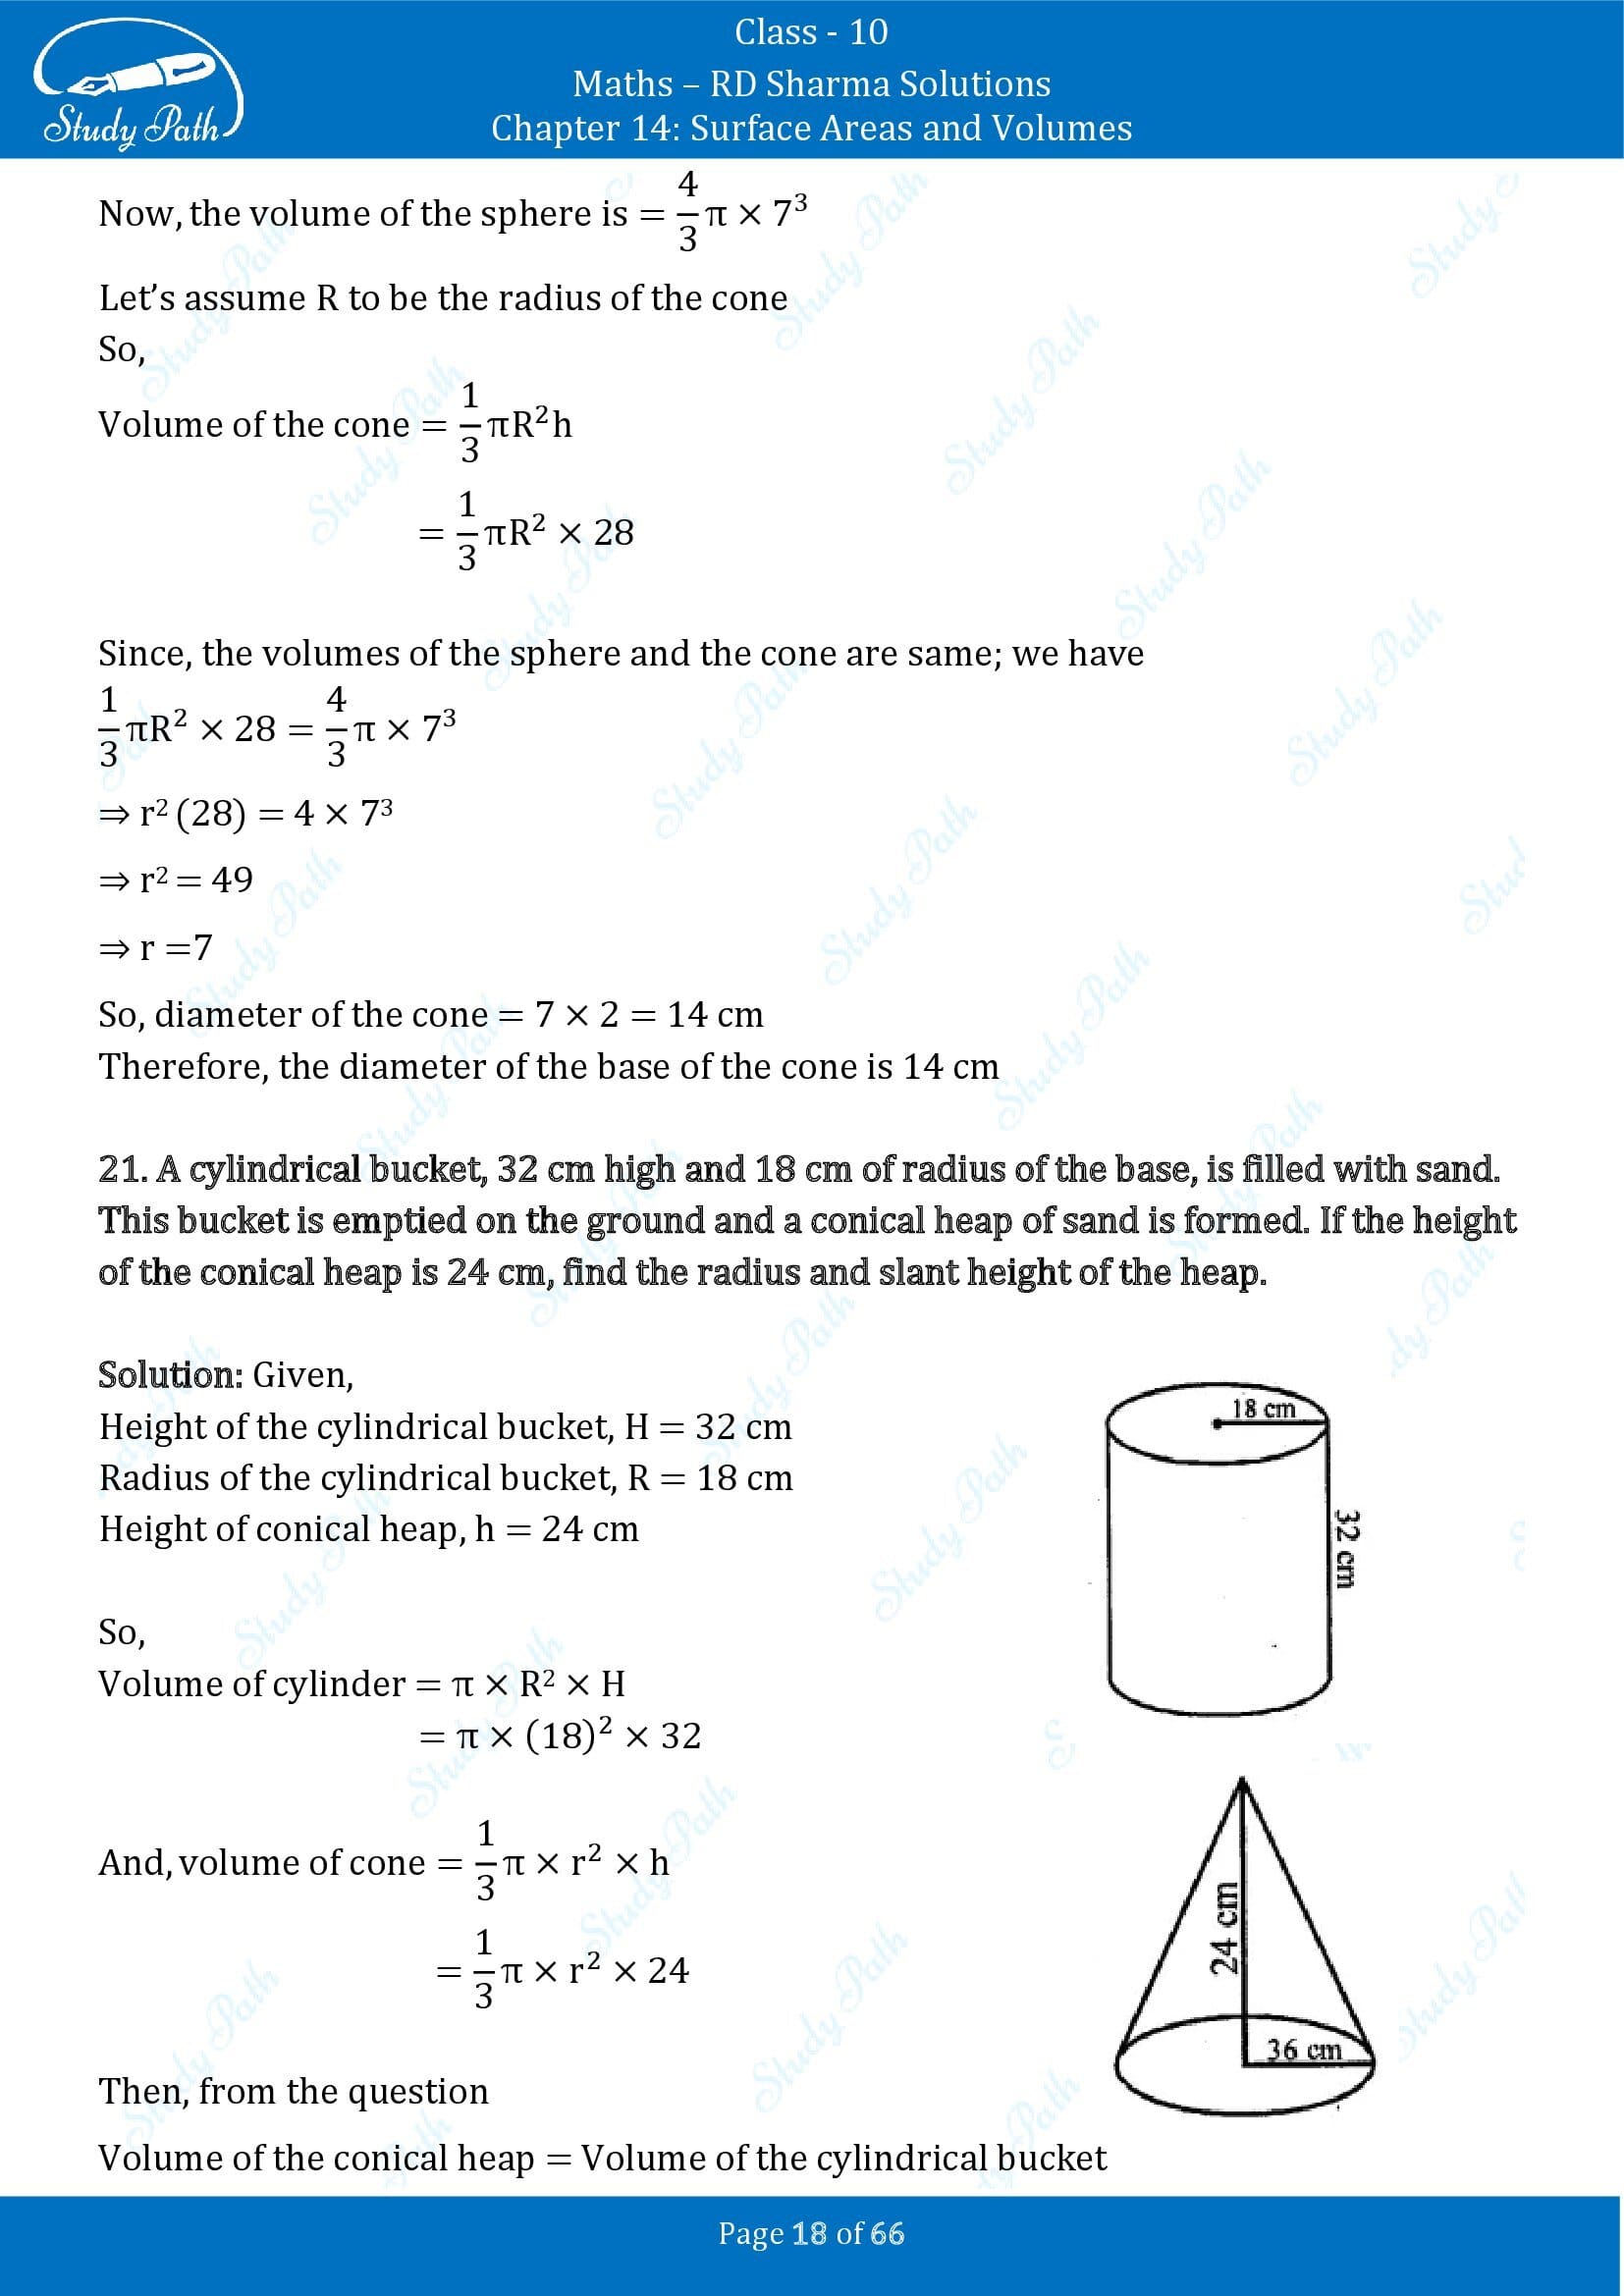 RD Sharma Solutions Class 10 Chapter 14 Surface Areas and Volumes Exercise 14.1 00018